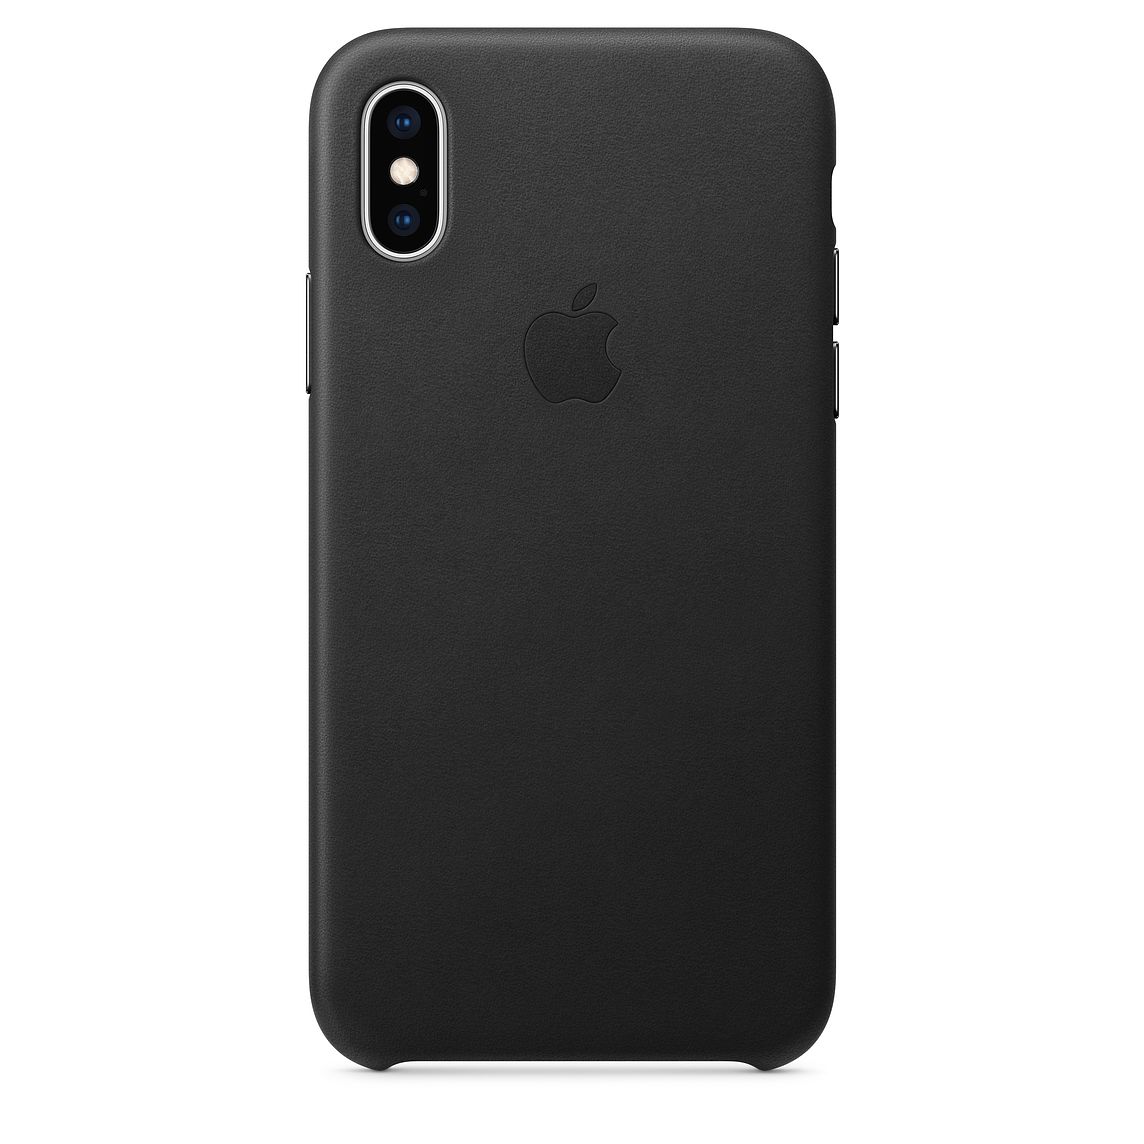 iPhone XS Max Leather Case Black MRWT2FE/A